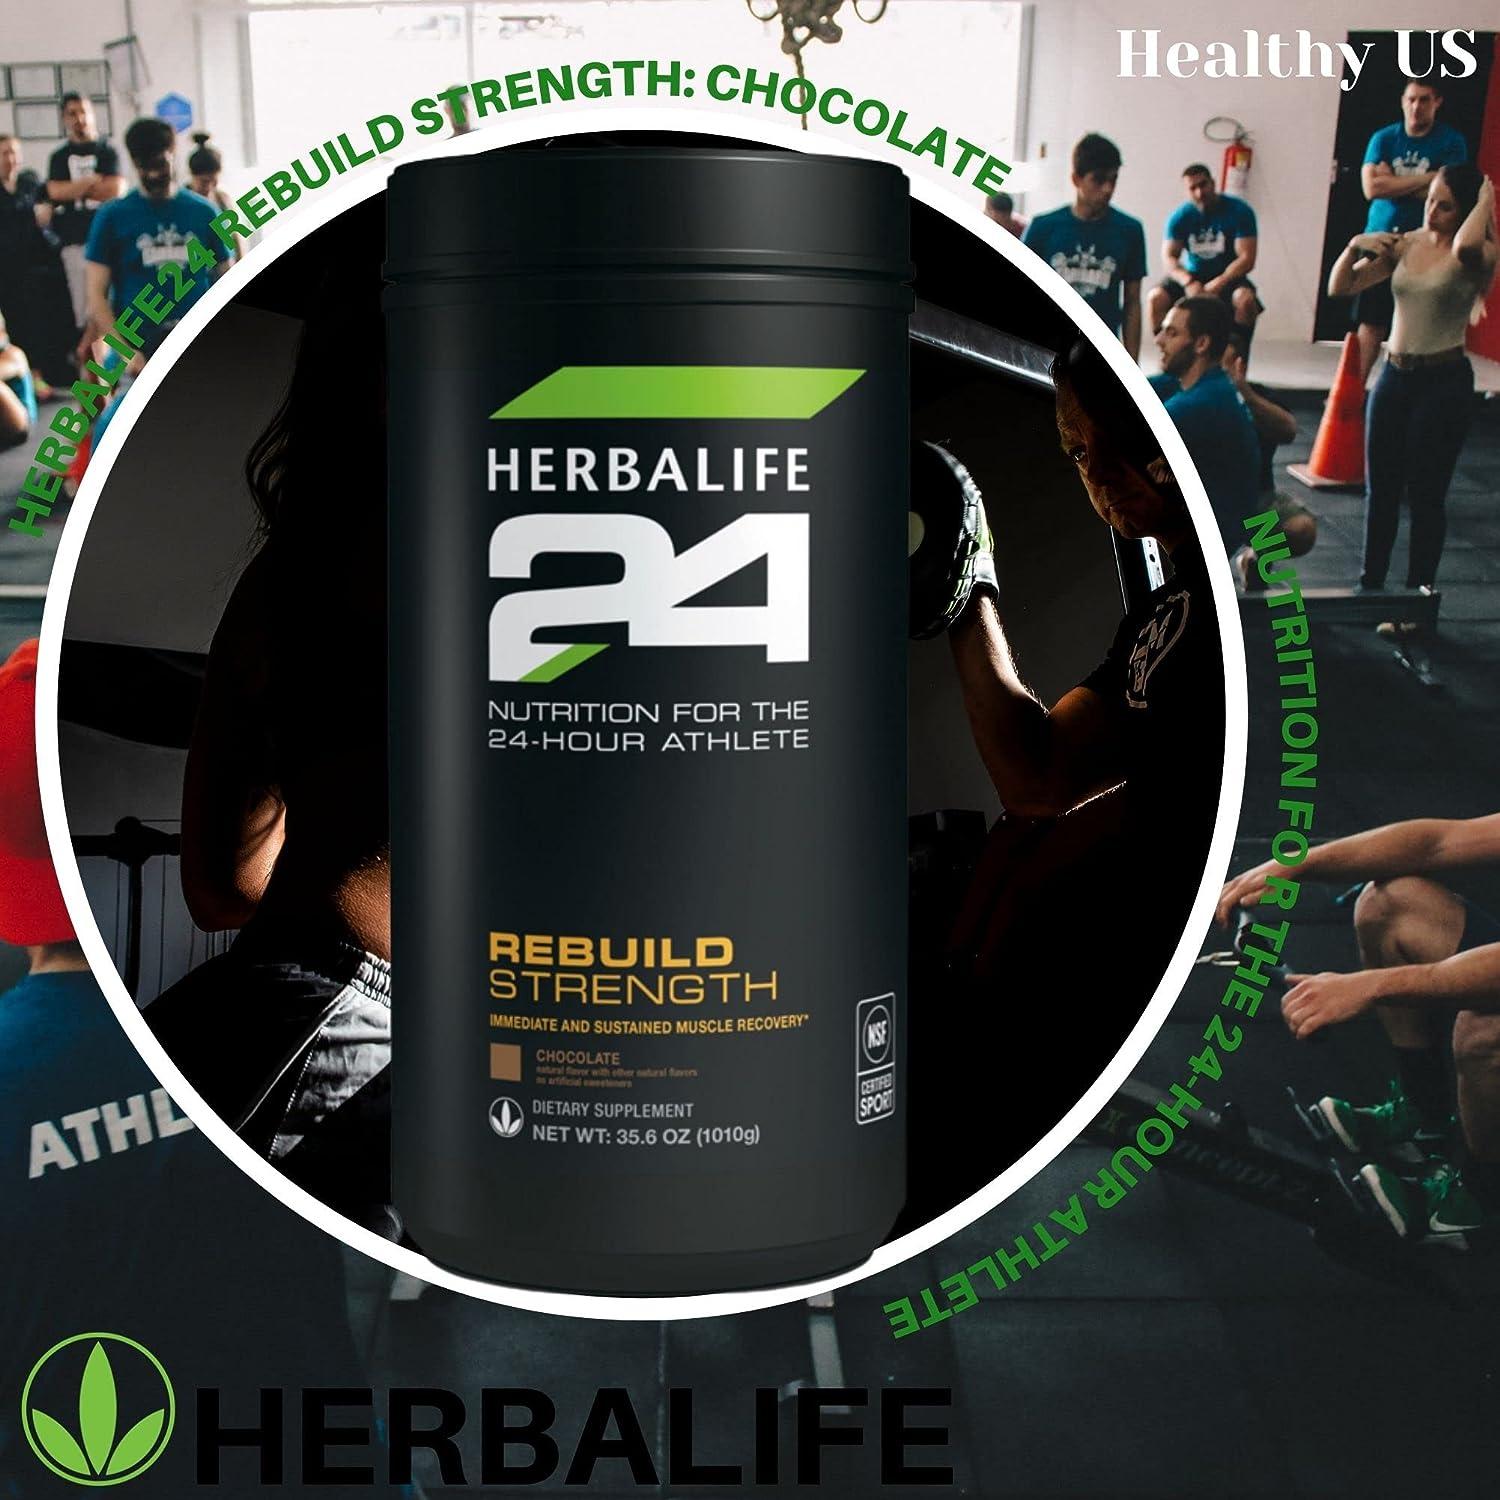 Herbalife 24 Rebuild Strength Chocolate 1010 G Nutrition For The 24